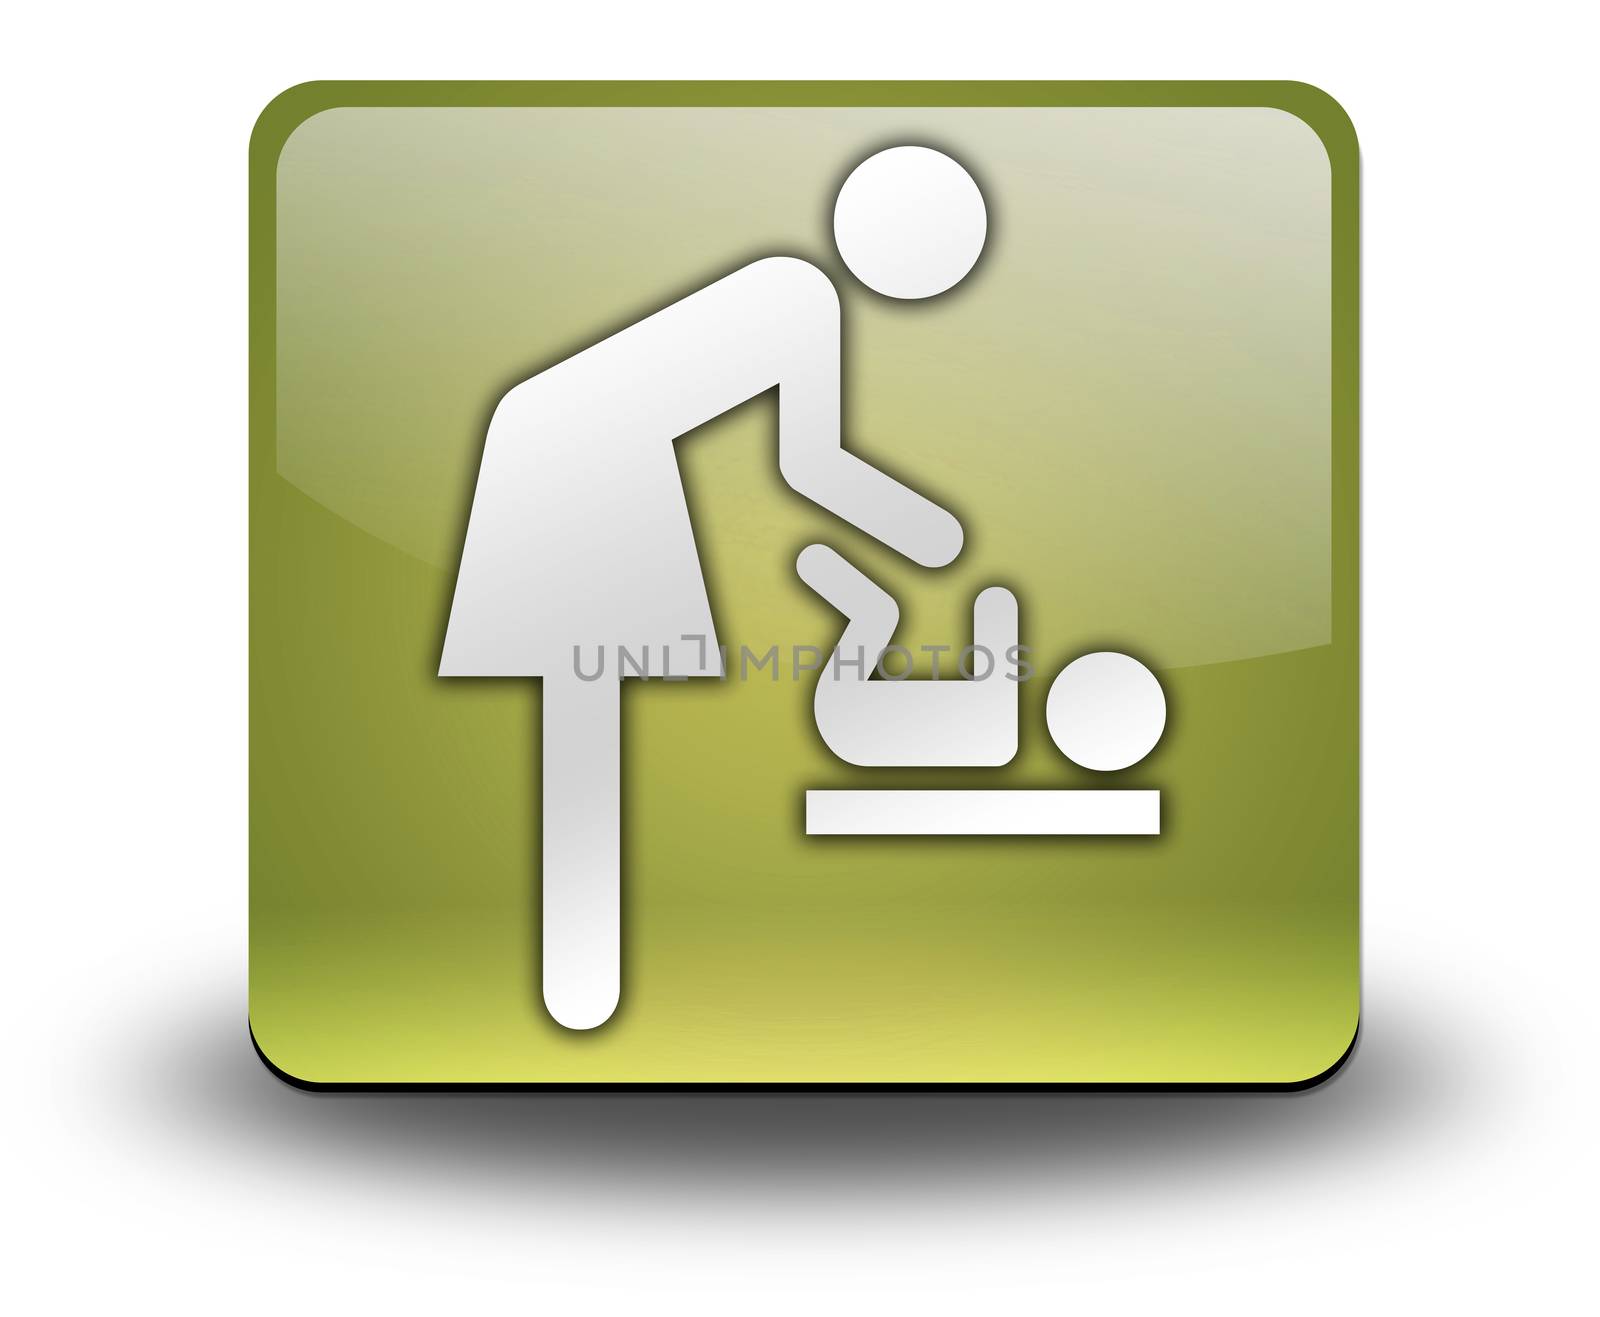 Icon/Button/Pictogram "Baby Change"